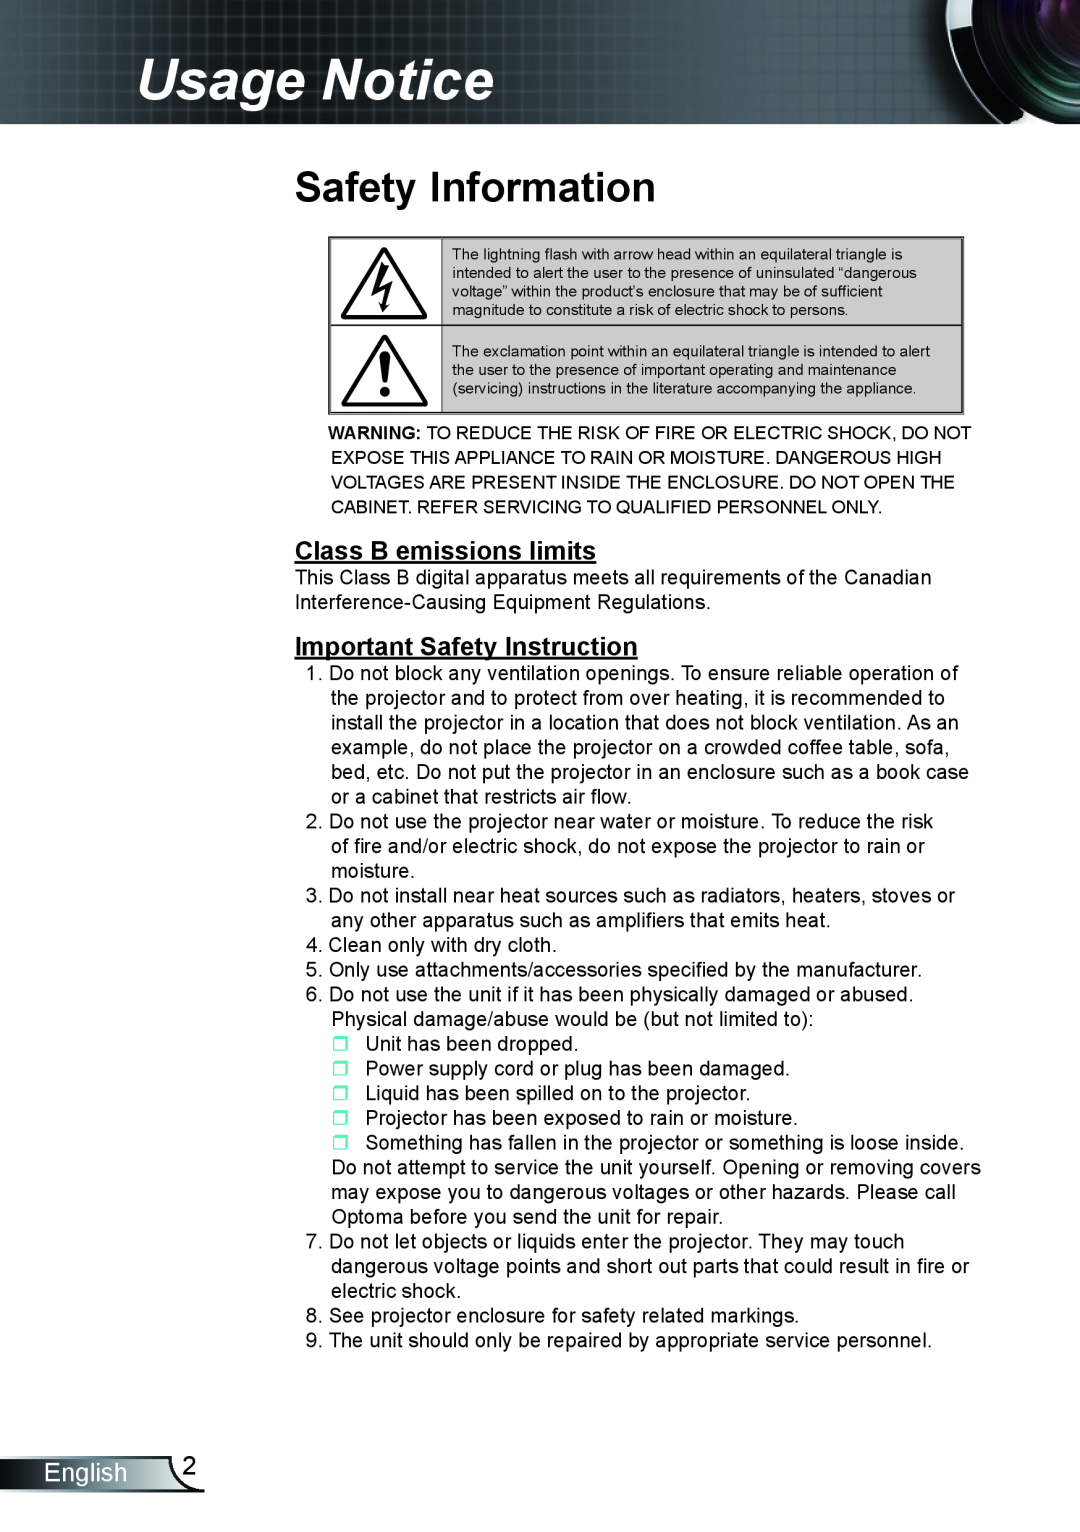 Optoma Technology TX610ST manual Usage Notice, Safety Information, Class B emissions limits, Important Safety Instruction 